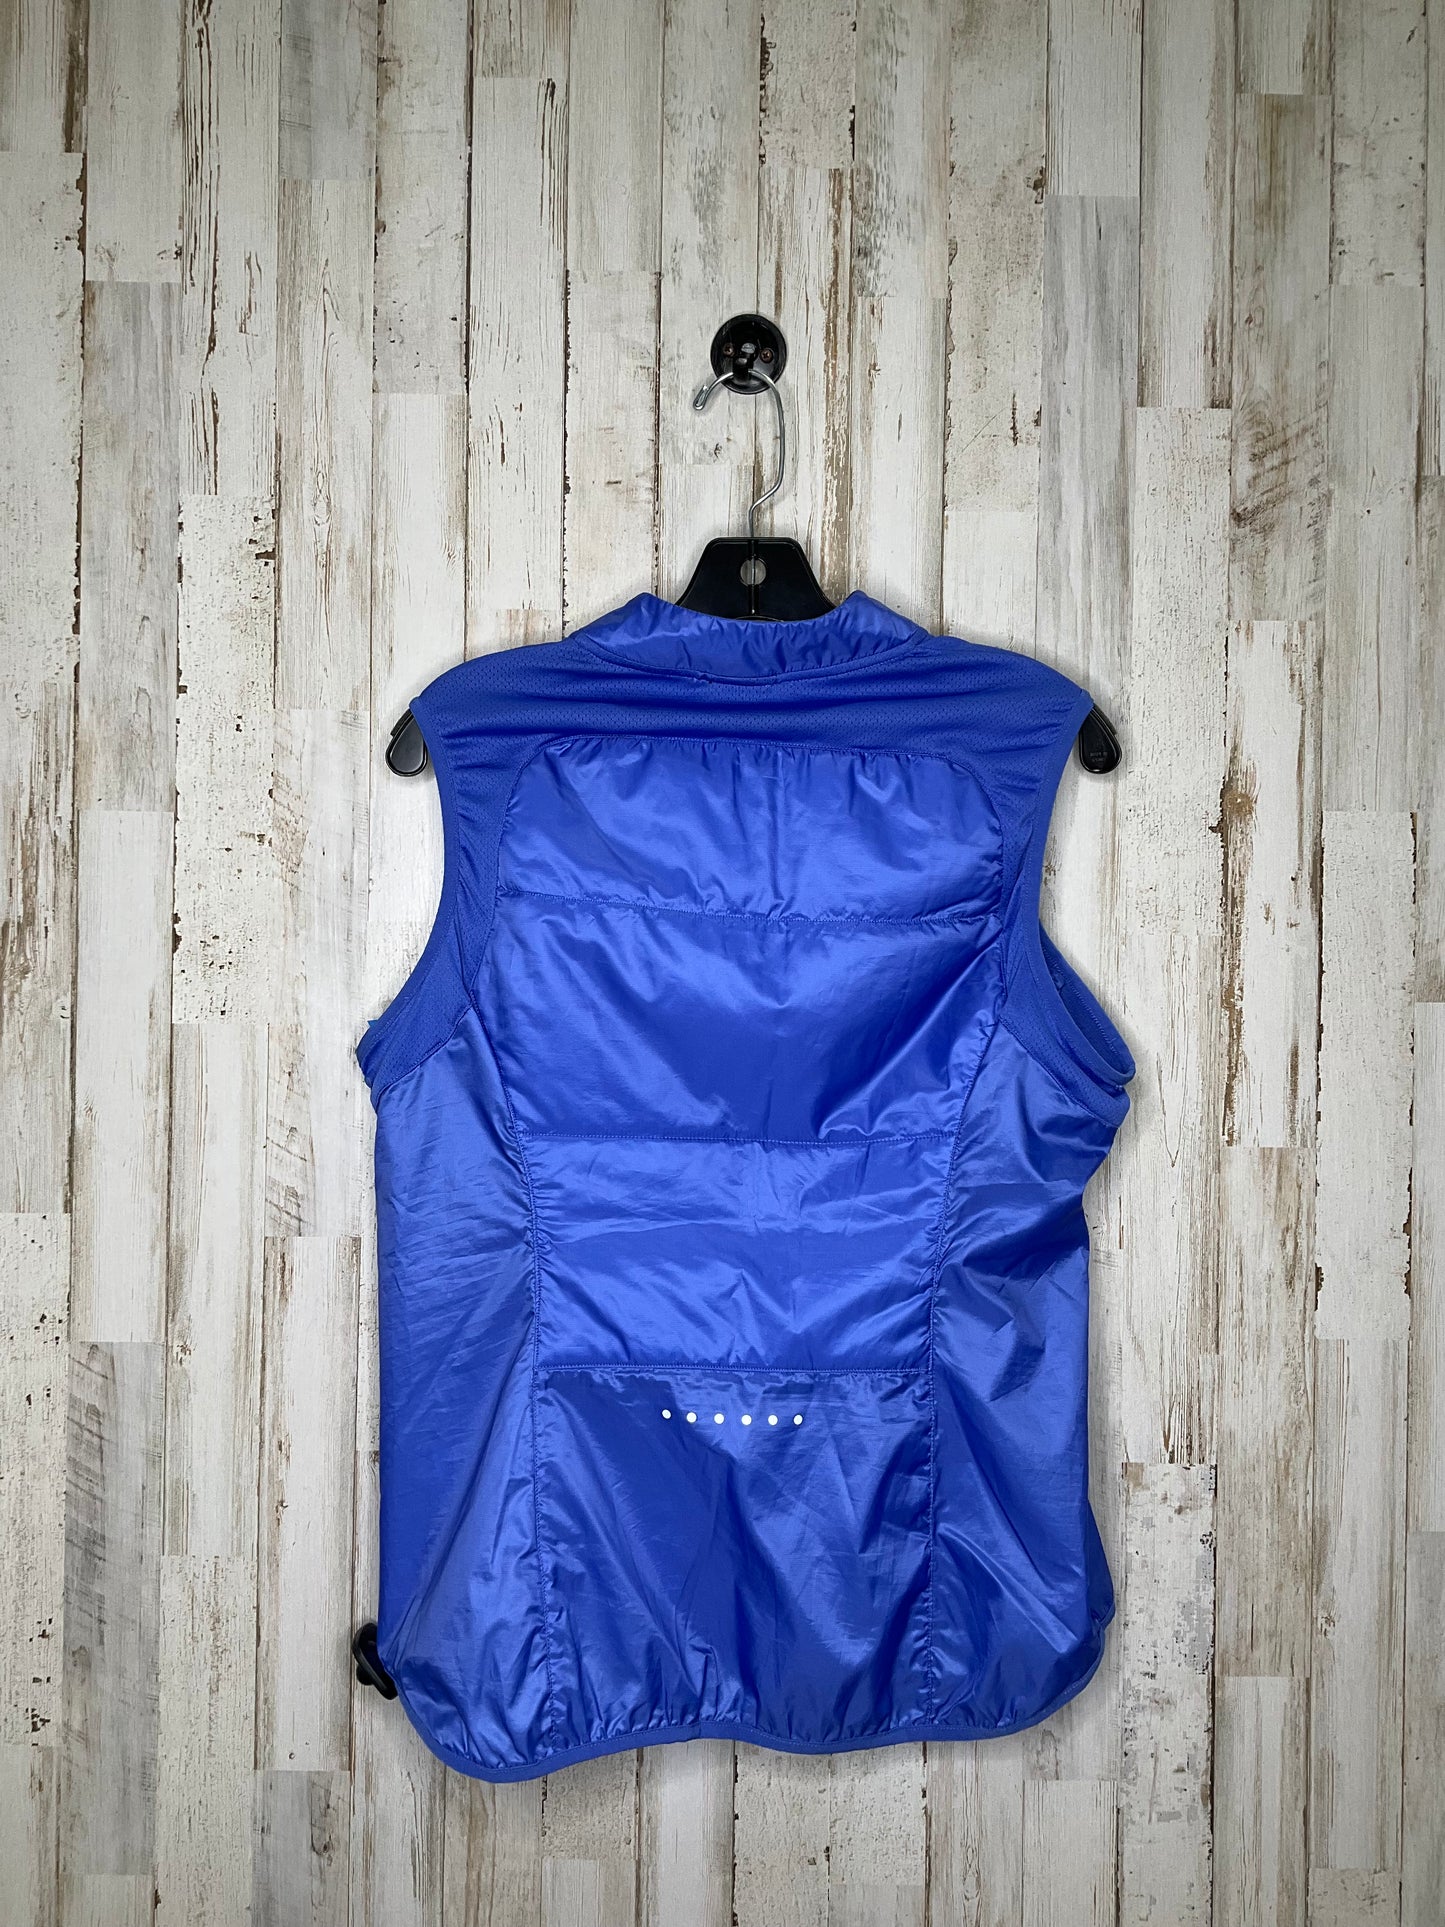 Vest Other By Nike  Size: M